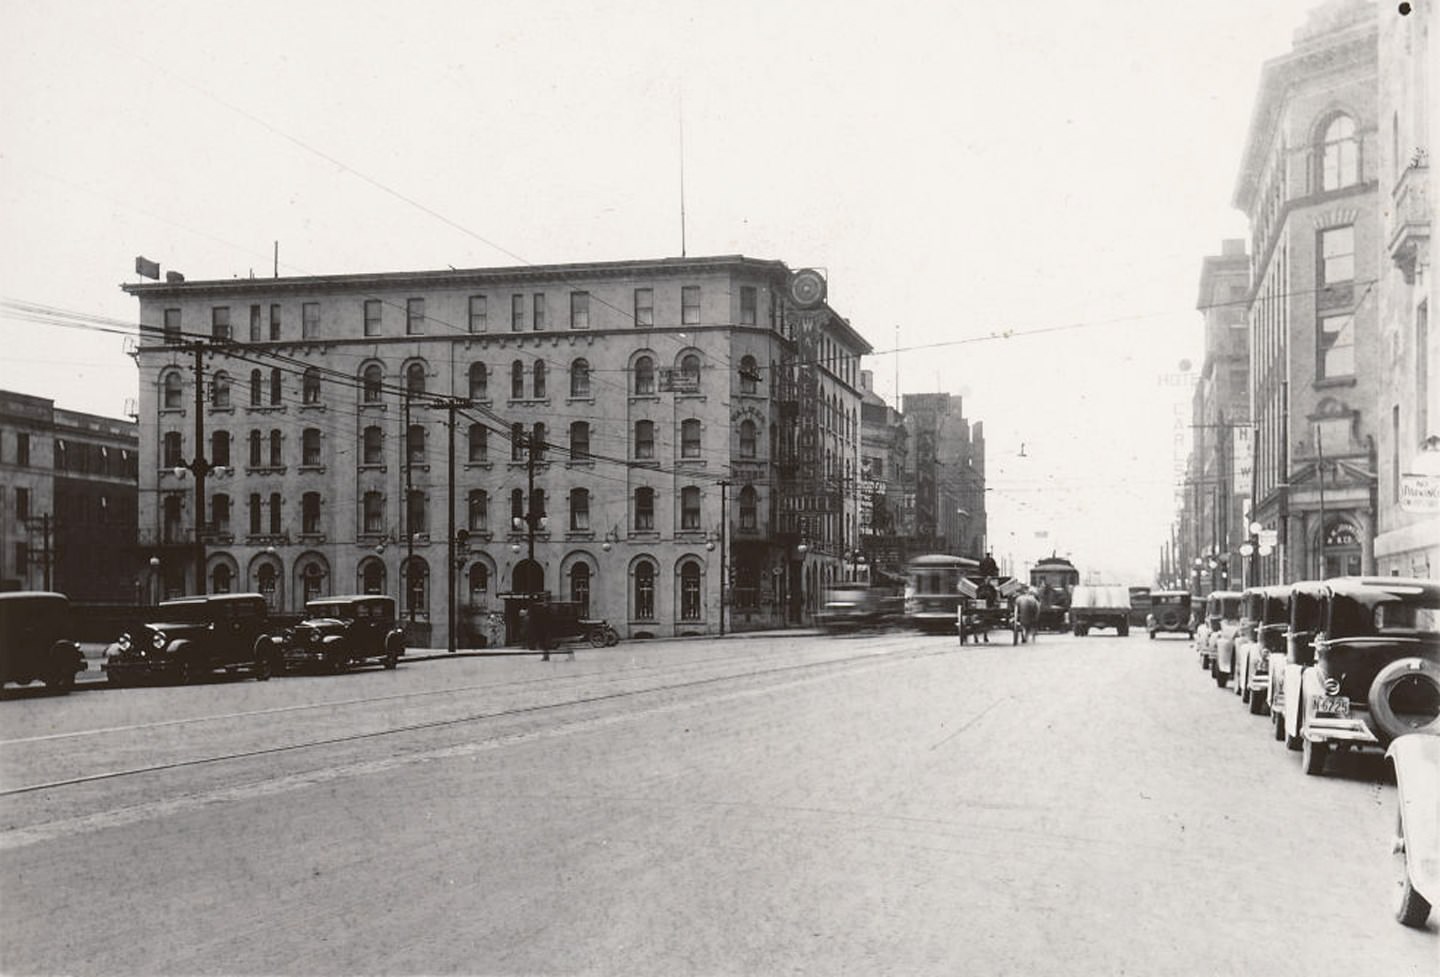 View looking west on Front St. W., towards York St., 1929. The Walker House Hotel stands prominently to left of photo.